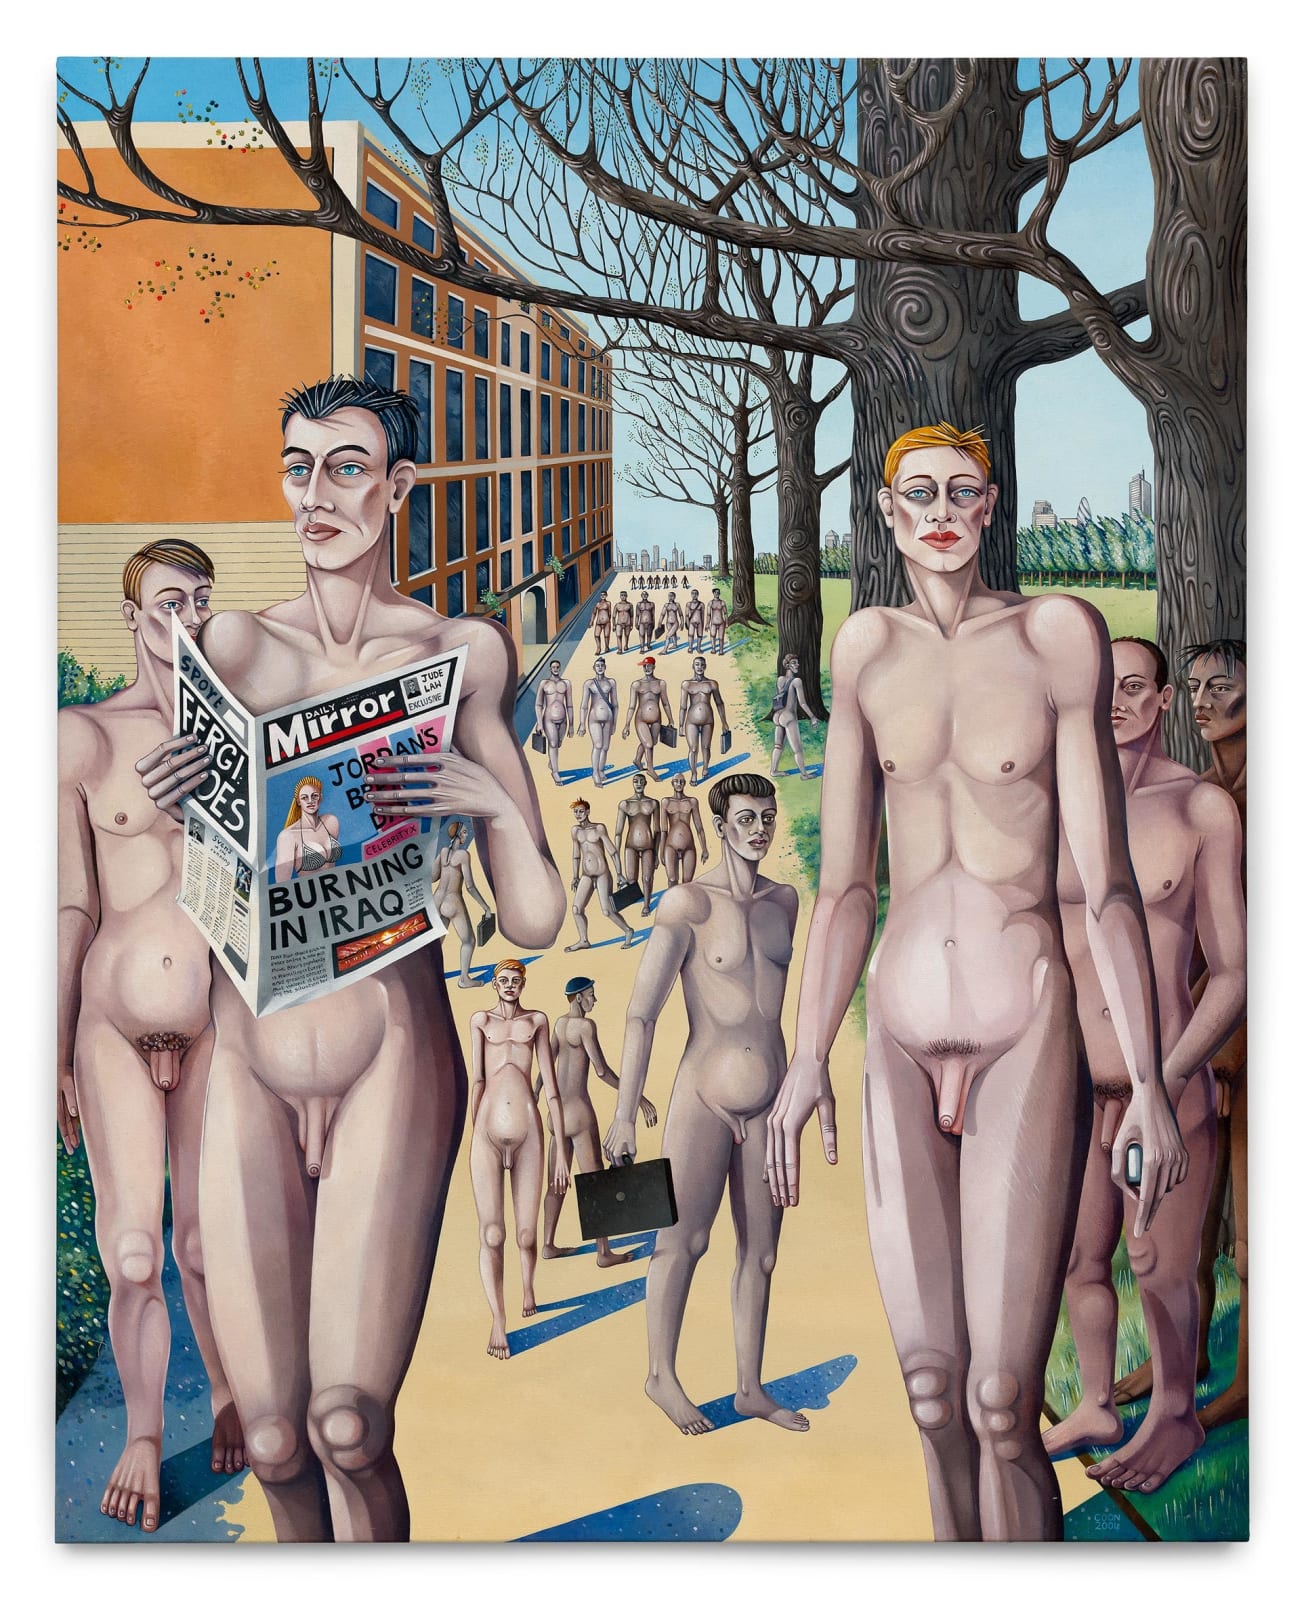 <div class="artist">Caroline Coon</div><div class="title_and_year"><span class="title">Rush Hour: She Strips Them Naked With Her Eyes</span><span class="year">, 2004</span></div>